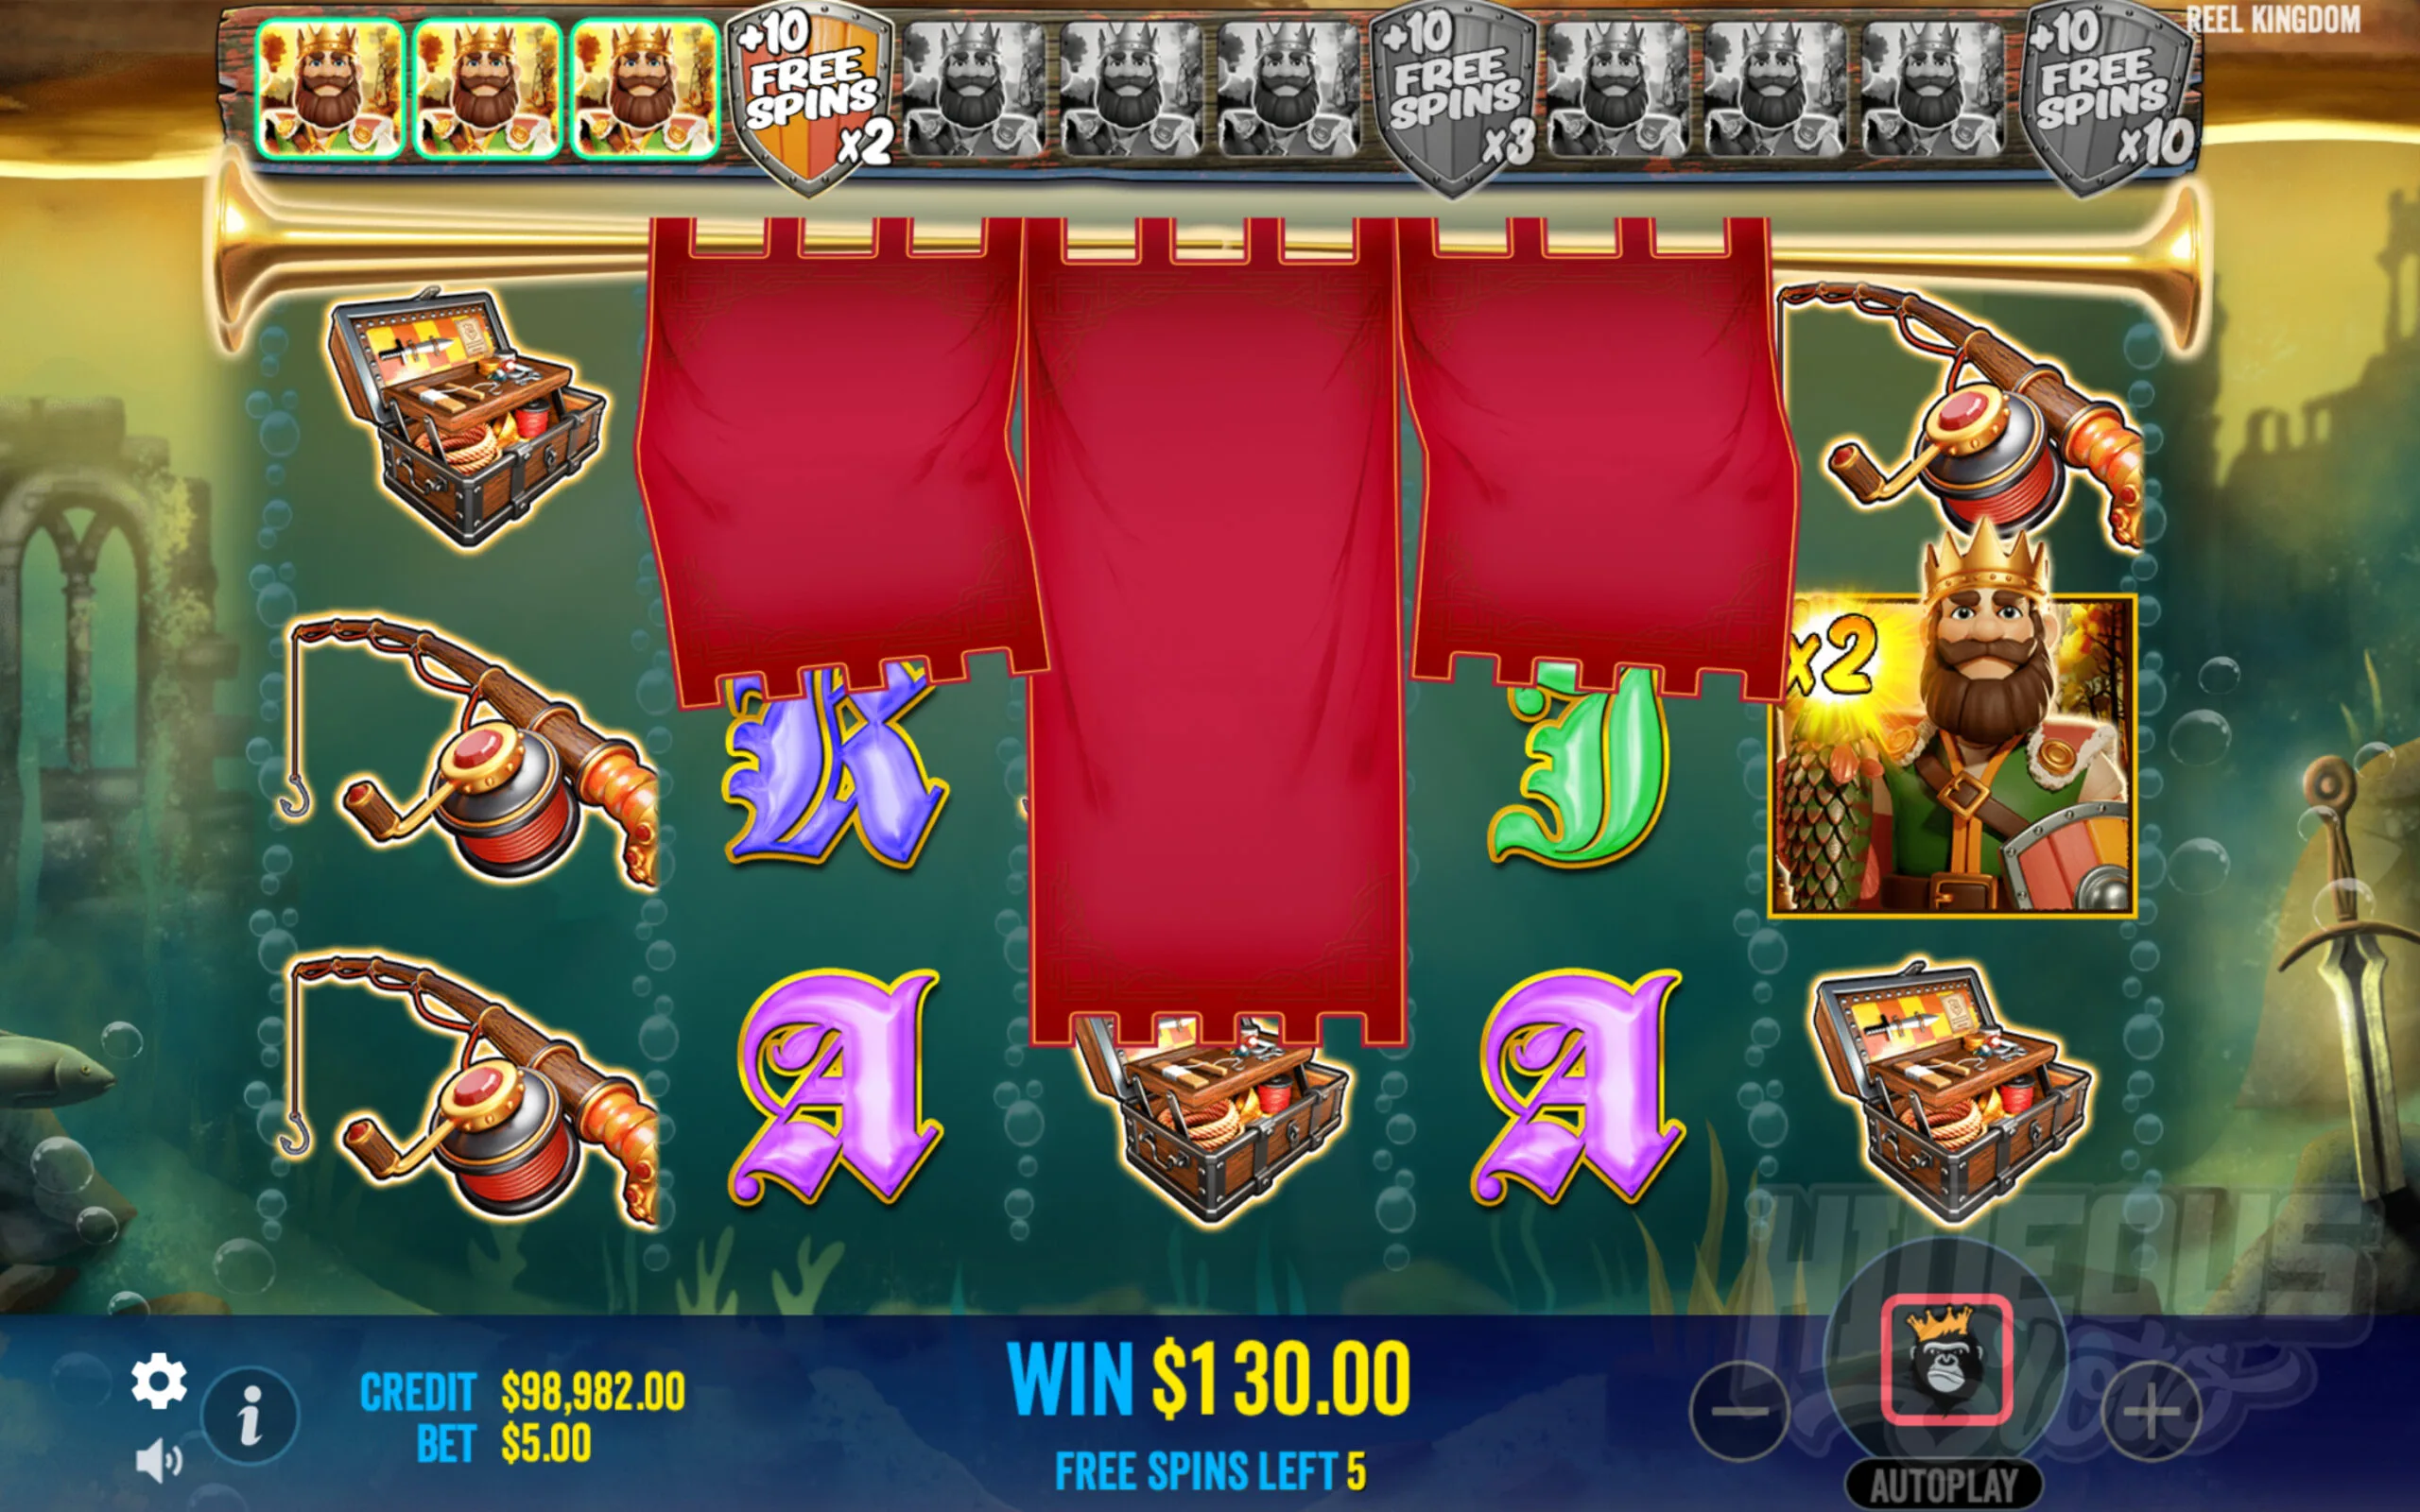 Random Features Can Occur During Free Spins to Add Fisherman Wilds or Money Symbols to the Reels